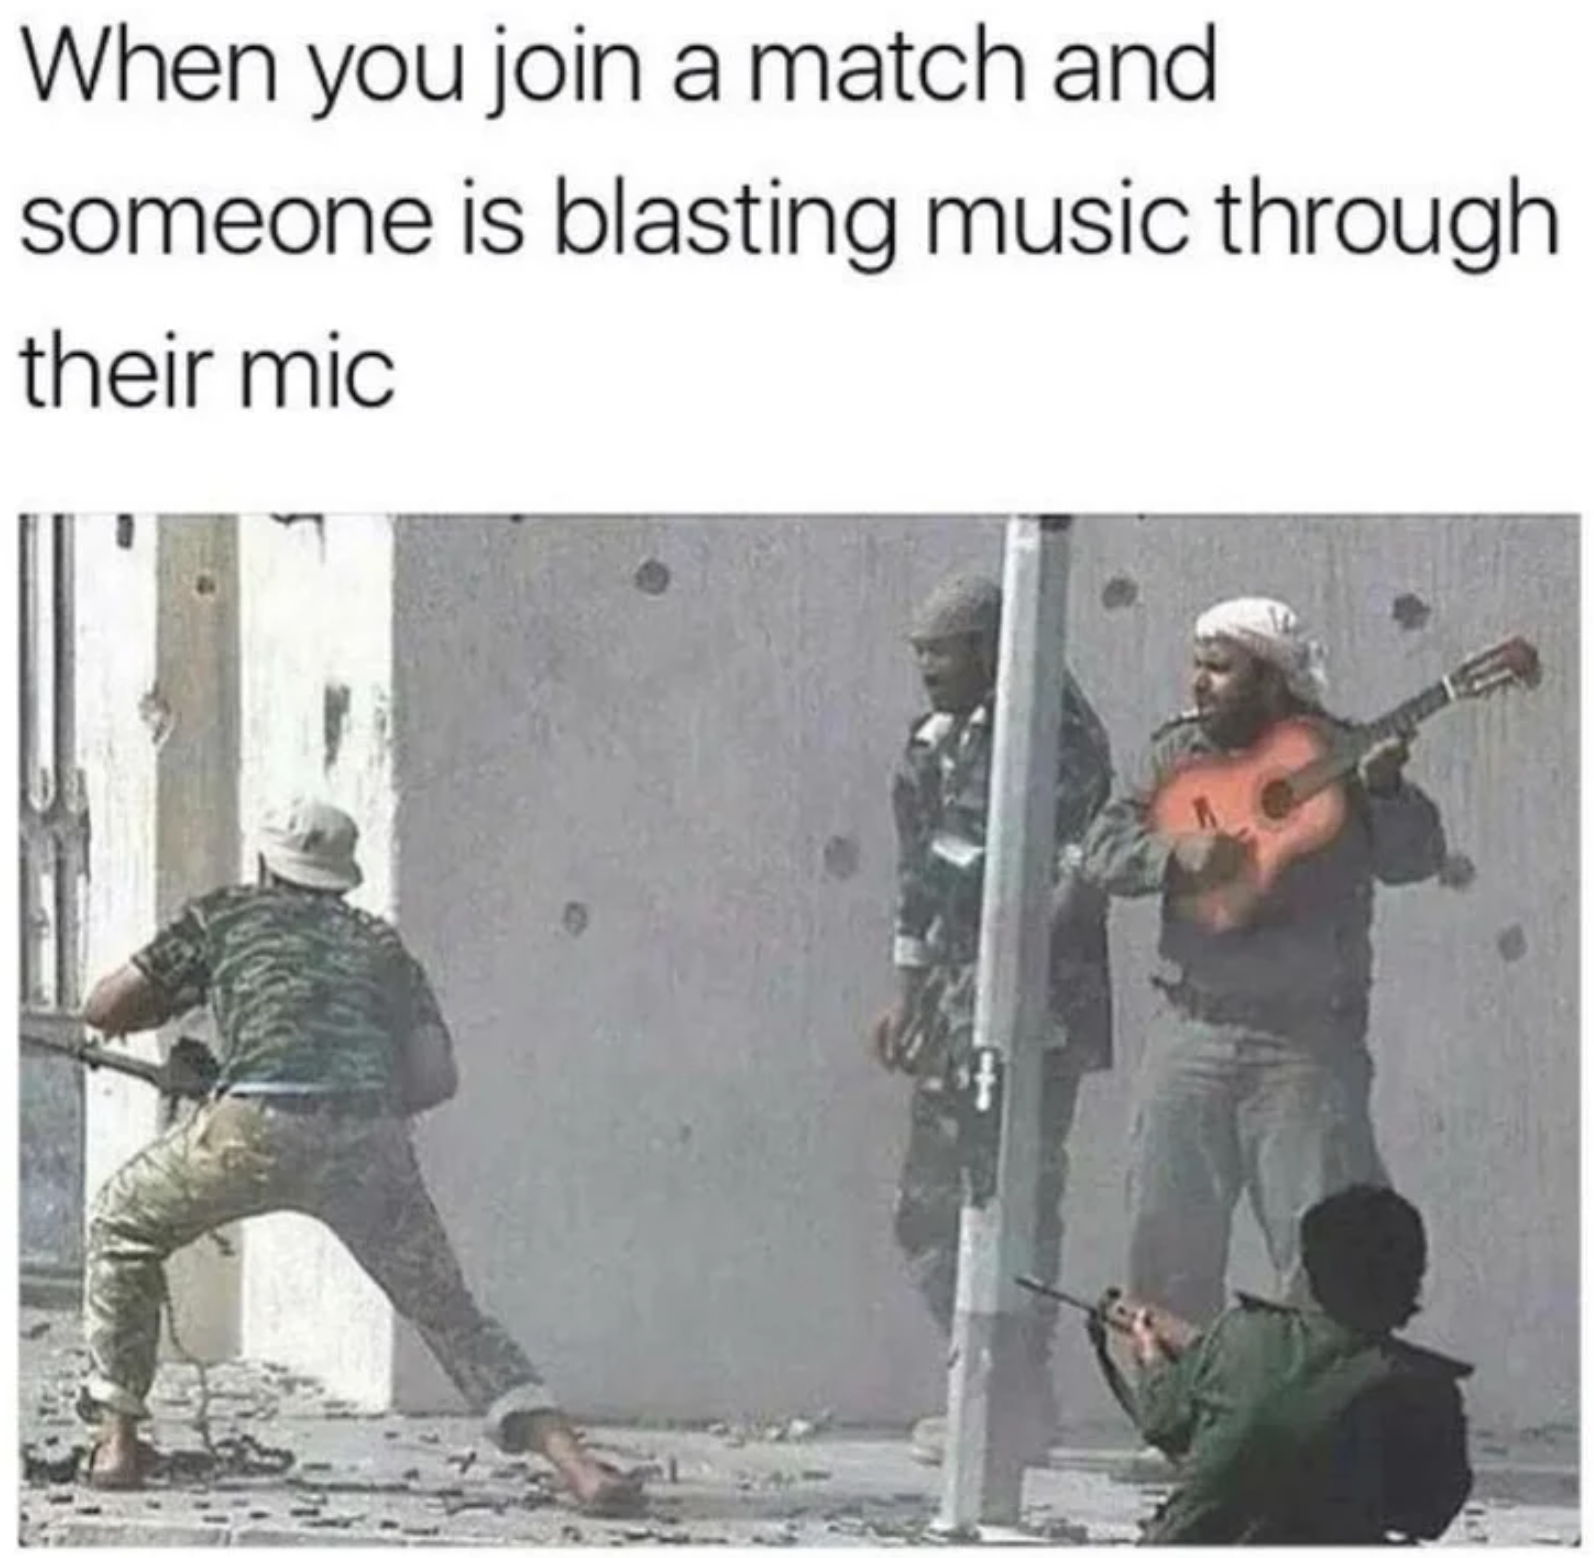 you join a match and someone mic - When you join a match and someone is blasting music through their mic